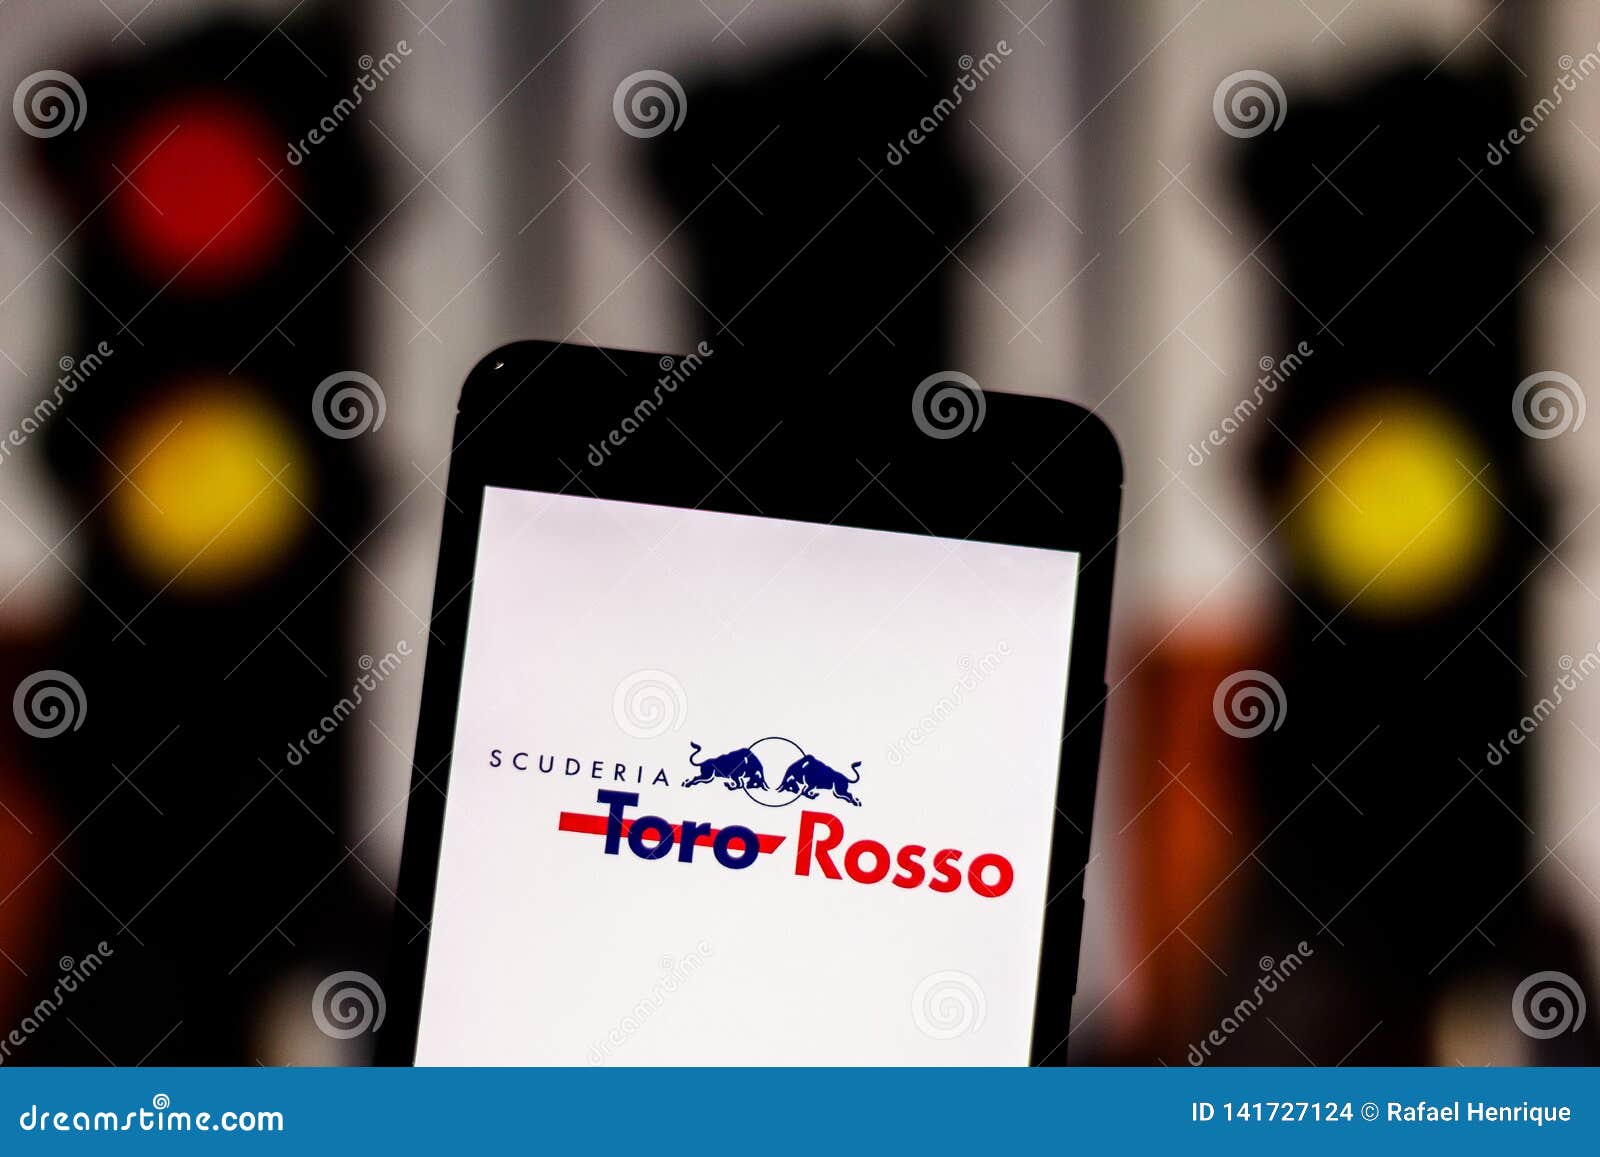 Team Logo Red Bull Toro Rosso Honda Formula 1 On The Screen Of The Mobile Device Editorial Stock Image Image Of Motoring Formula